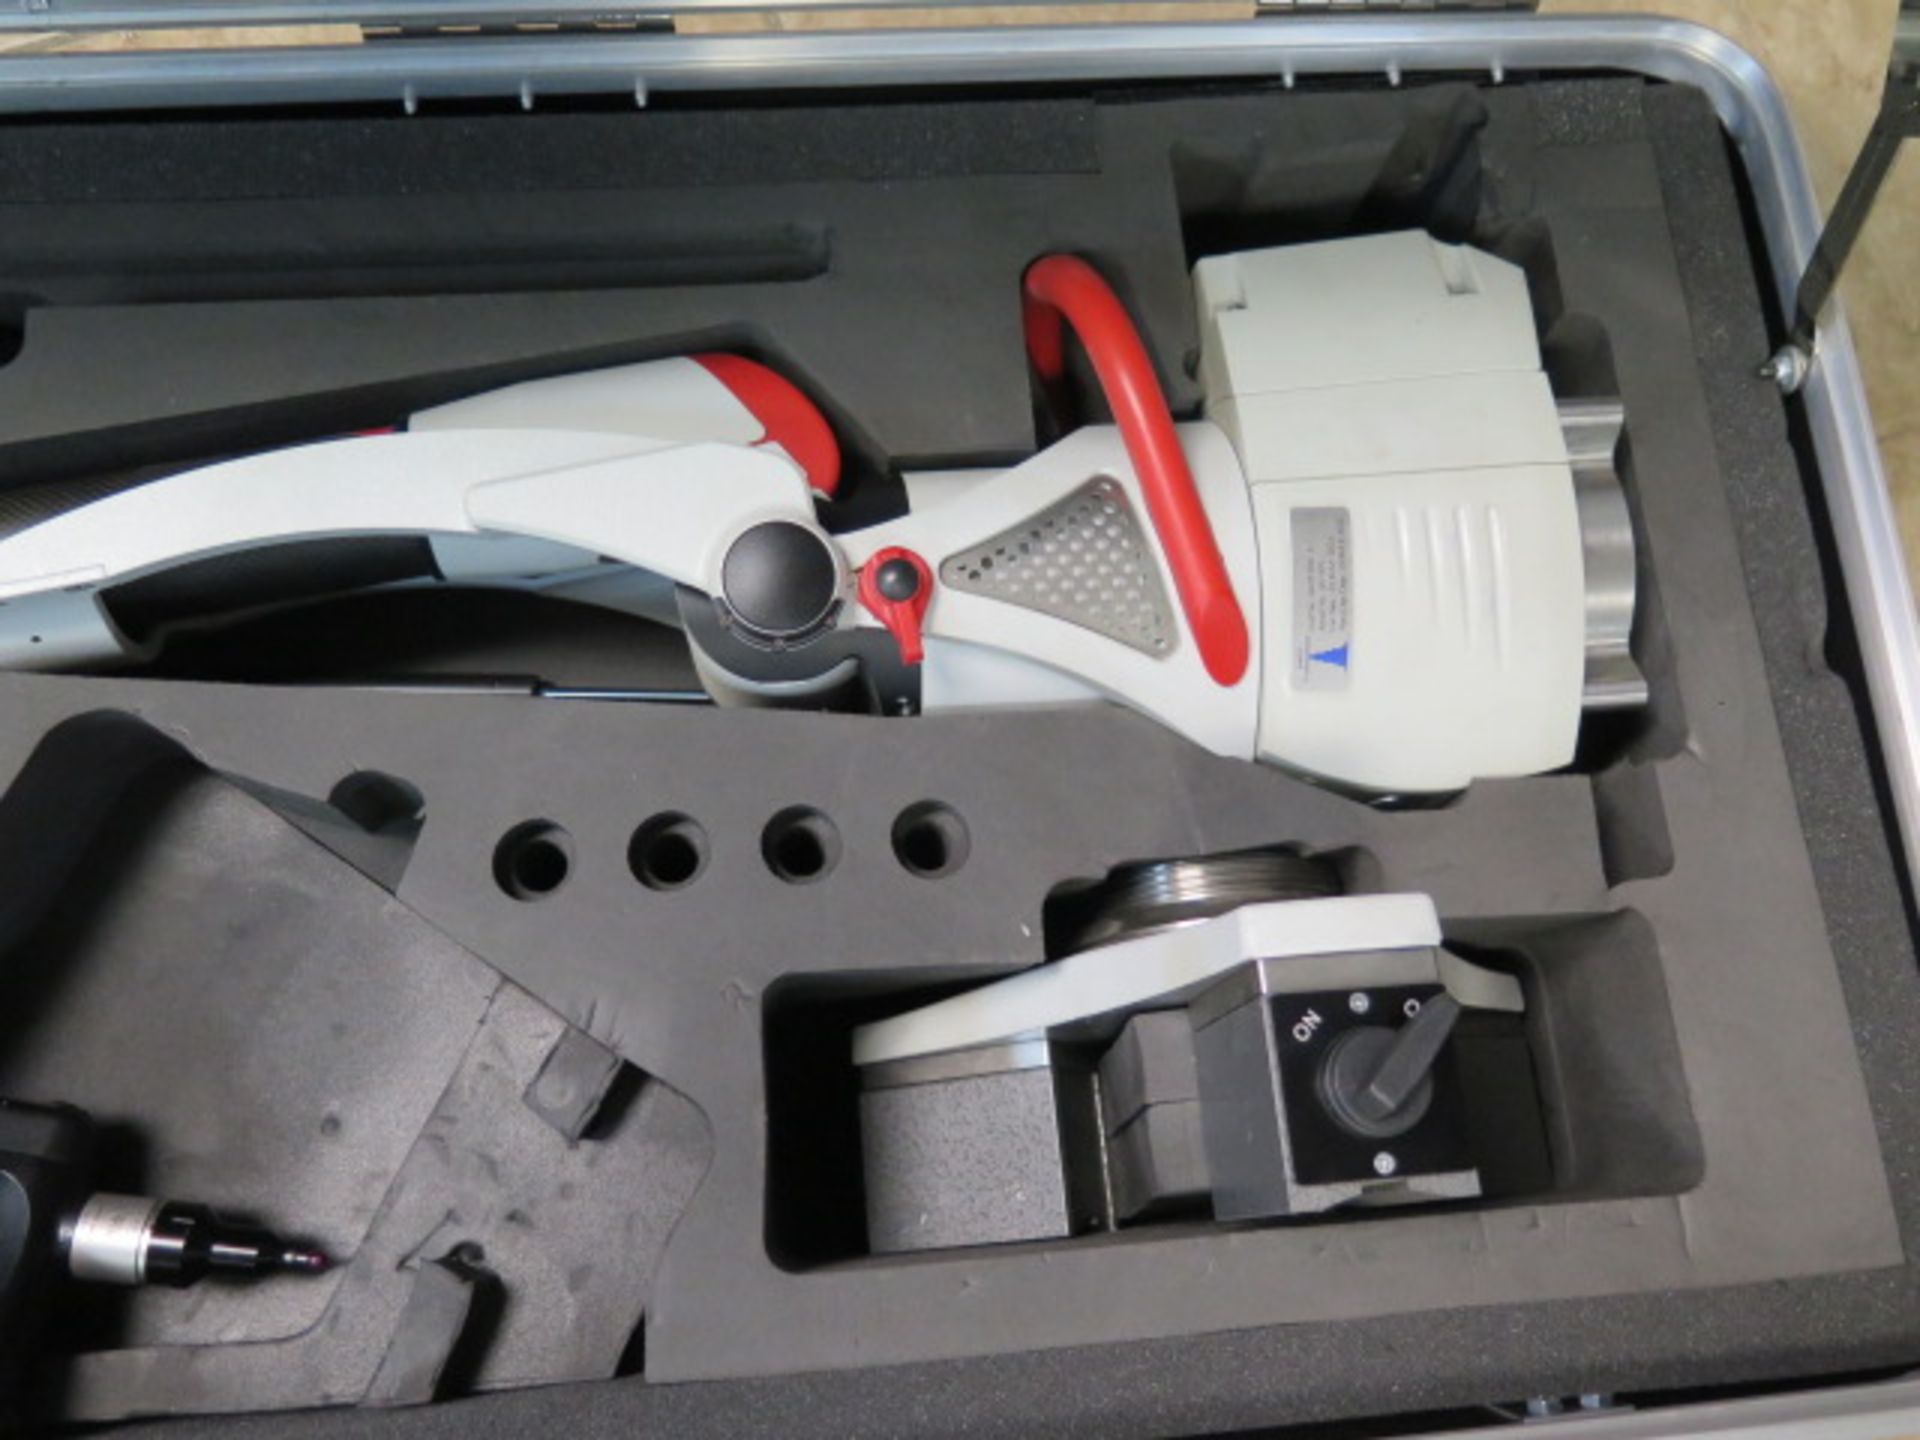 Hexagon Metrology Romer Absolute RA-7525 Portable CMM Arm w/ Access, Computer and Dongle (SOLD AS-IS - Image 3 of 13